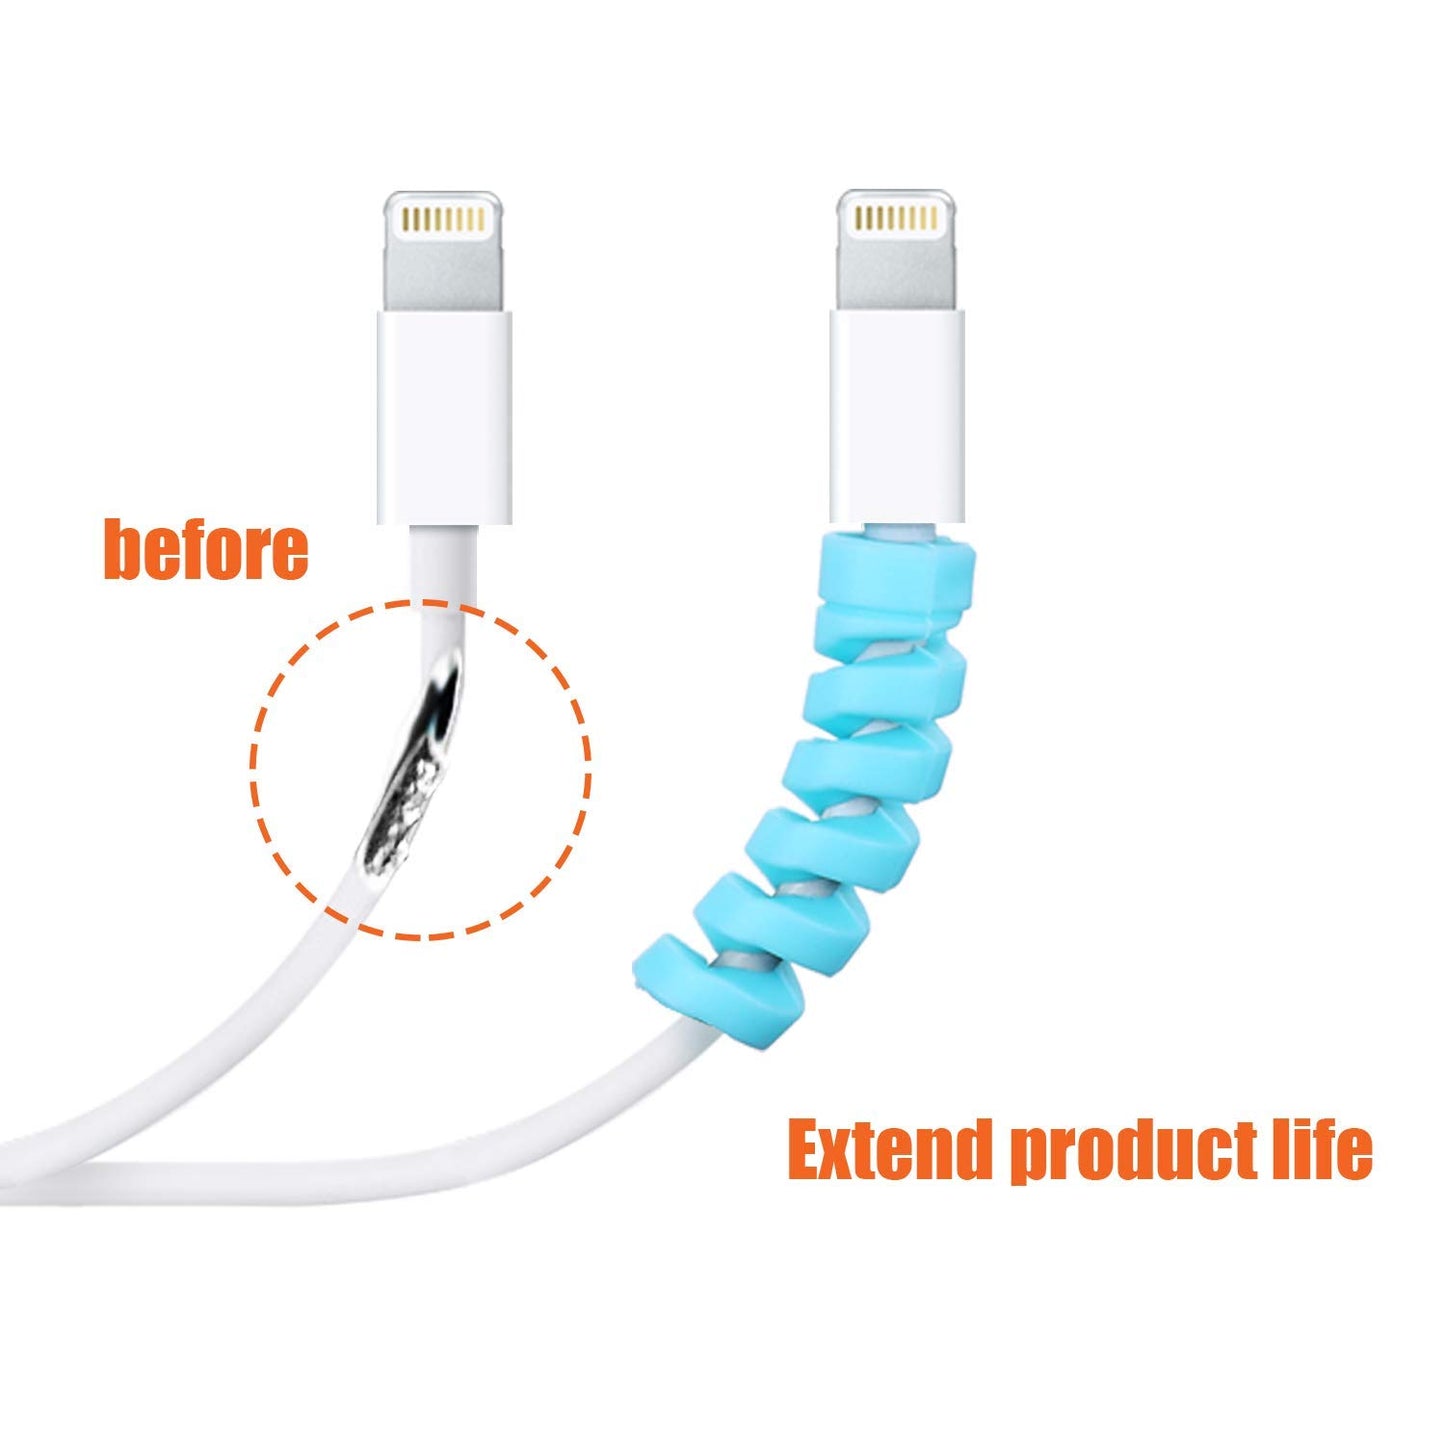 Charger Cable Protector Data Cable Saver Set of 1 (4 Pieces)